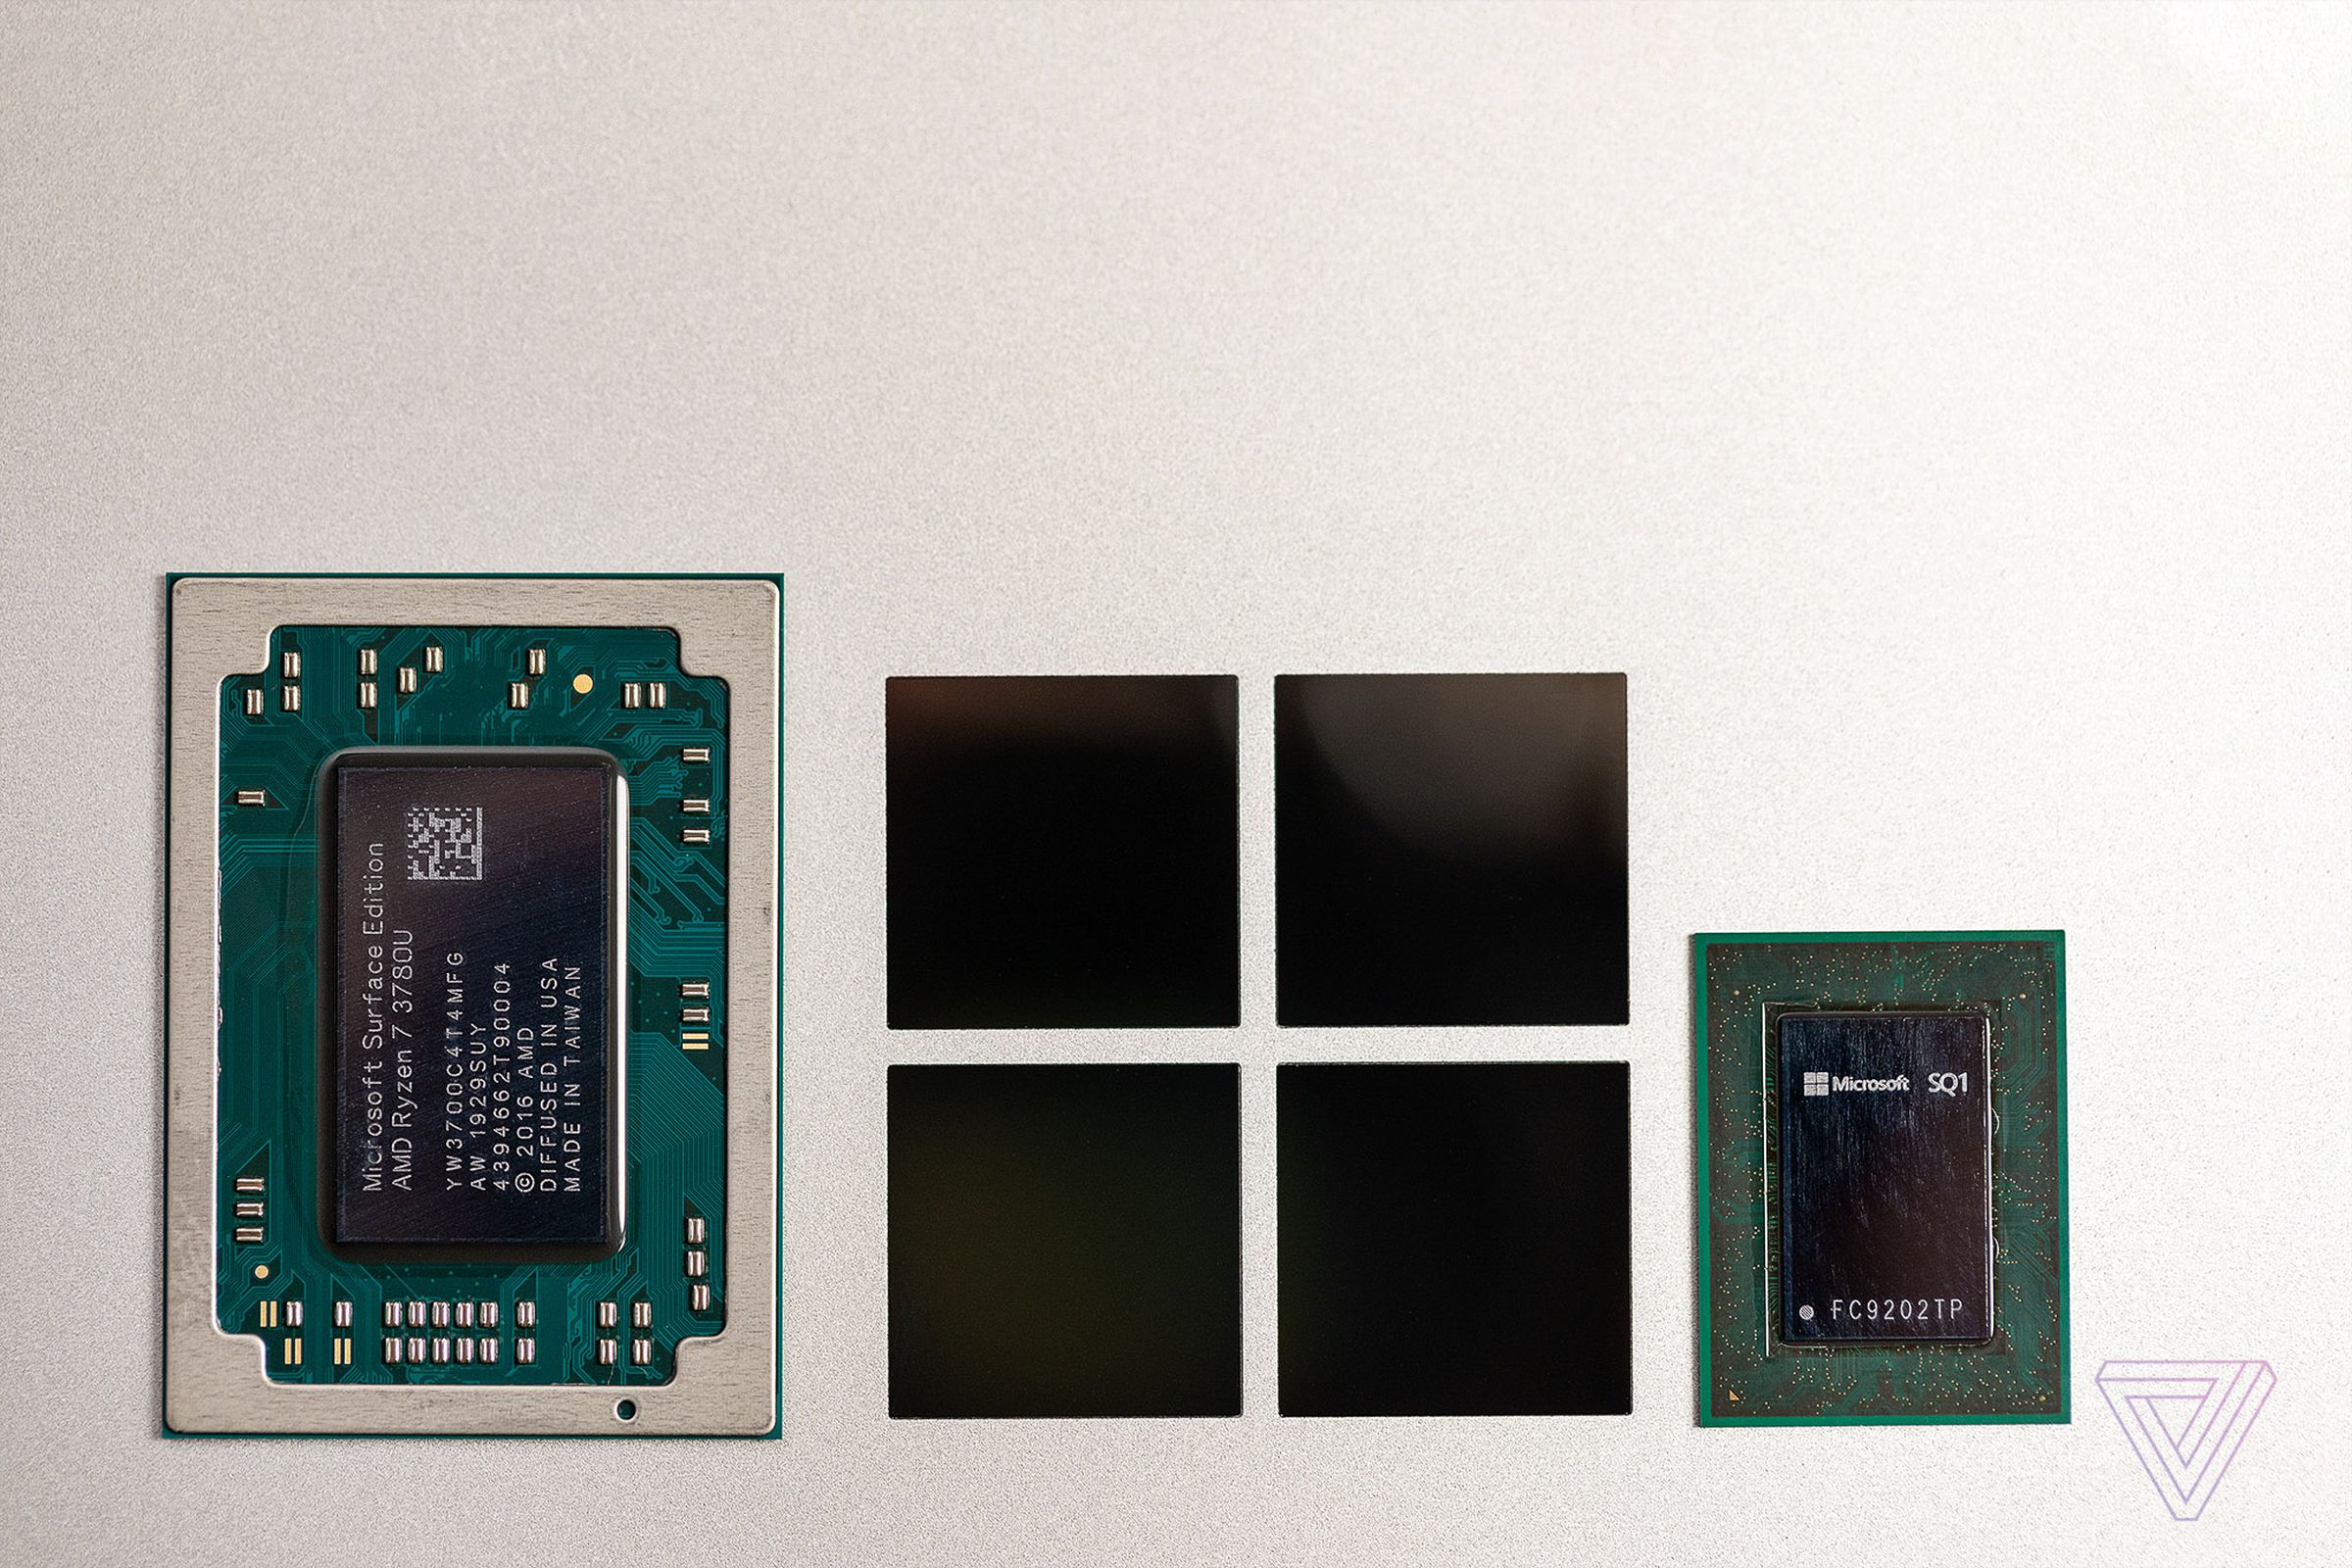 Microsoft’s custom SQ1 Qualcomm chip for the Surface Pro X (right).